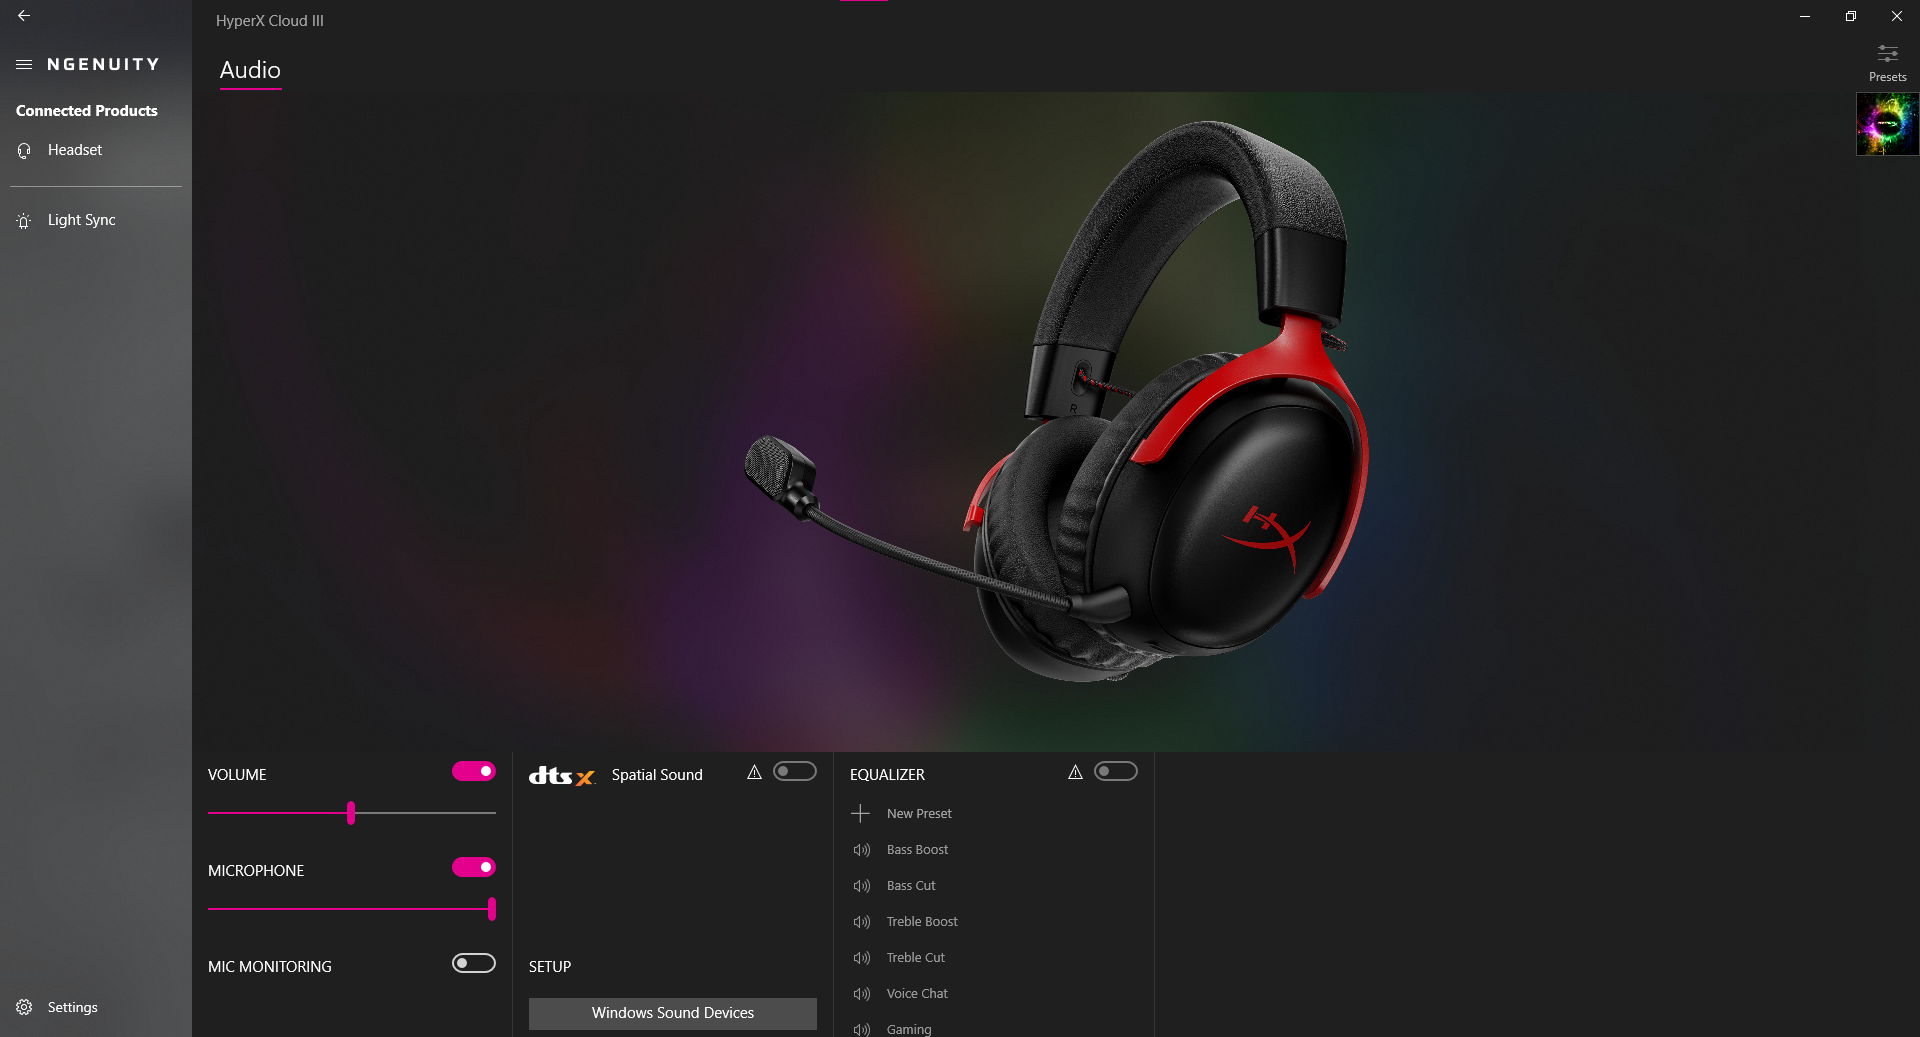 The HyperX Ngenuity software showing the Corsair Cloud III headset and some additional features like EQ.